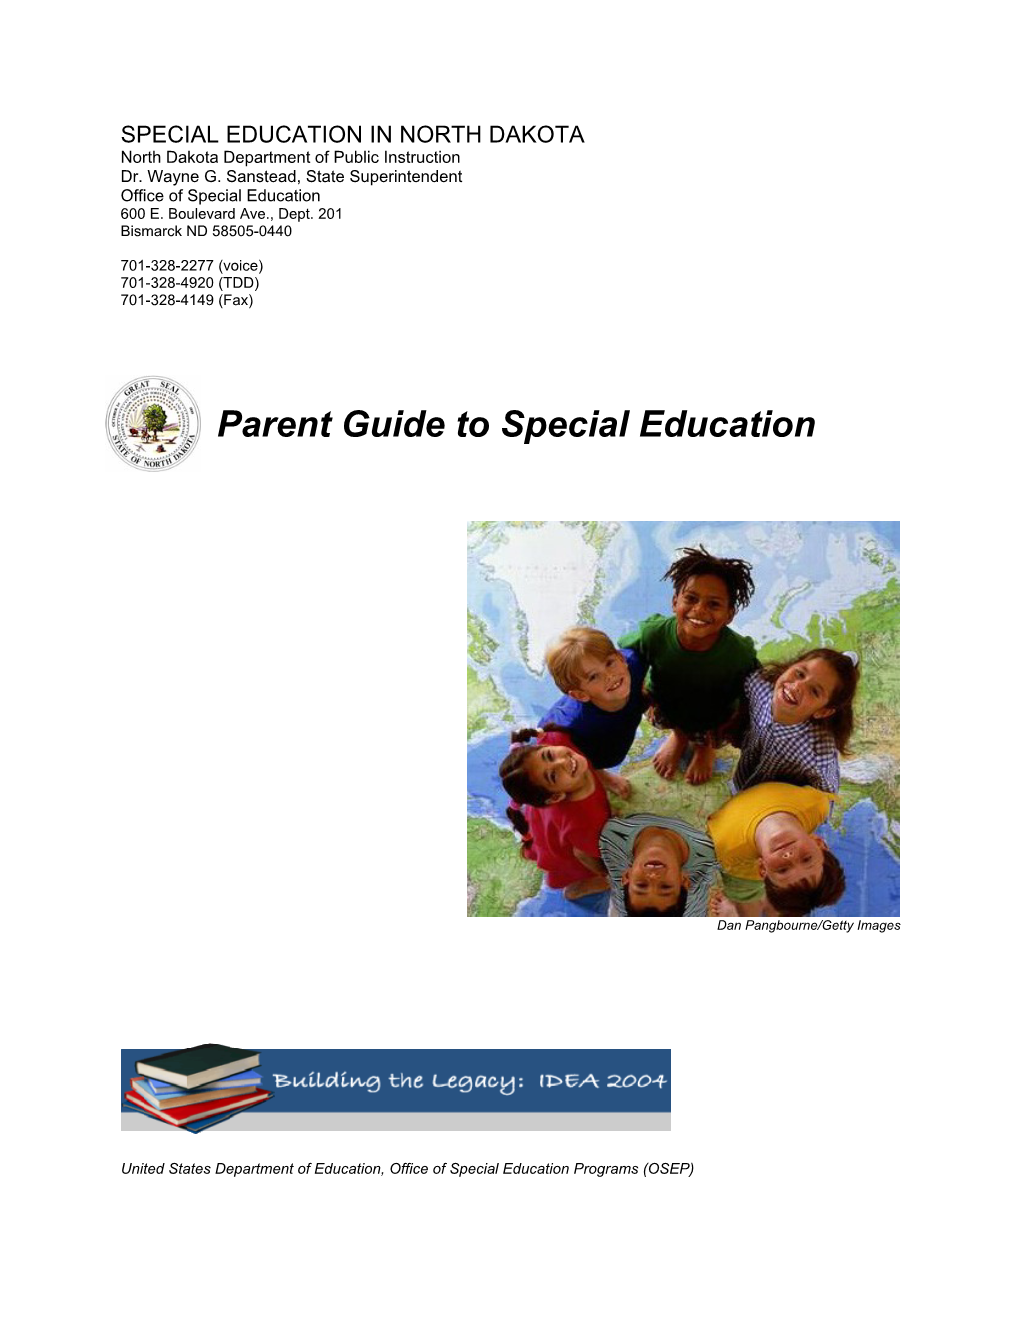 Parent Guide to Special Education 2007